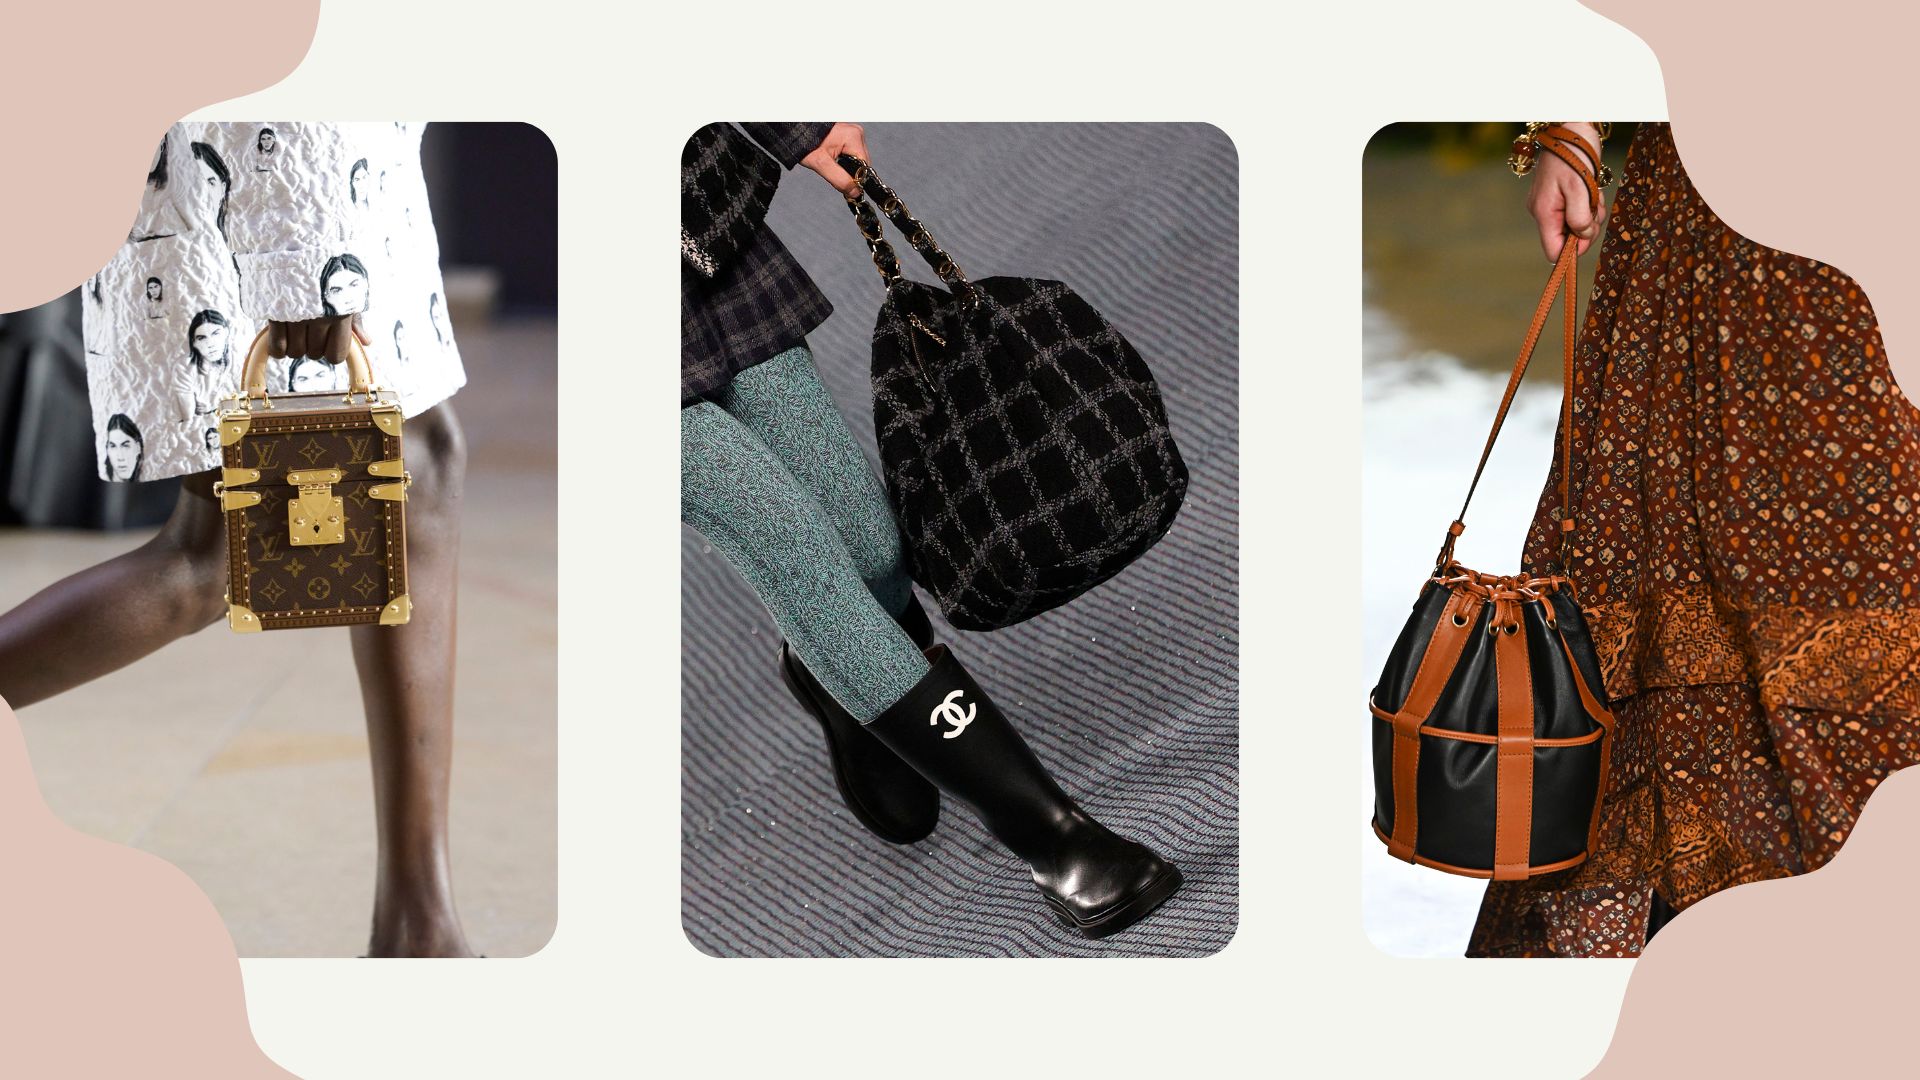 9 handbag trends 2022 - the styles to invest in now